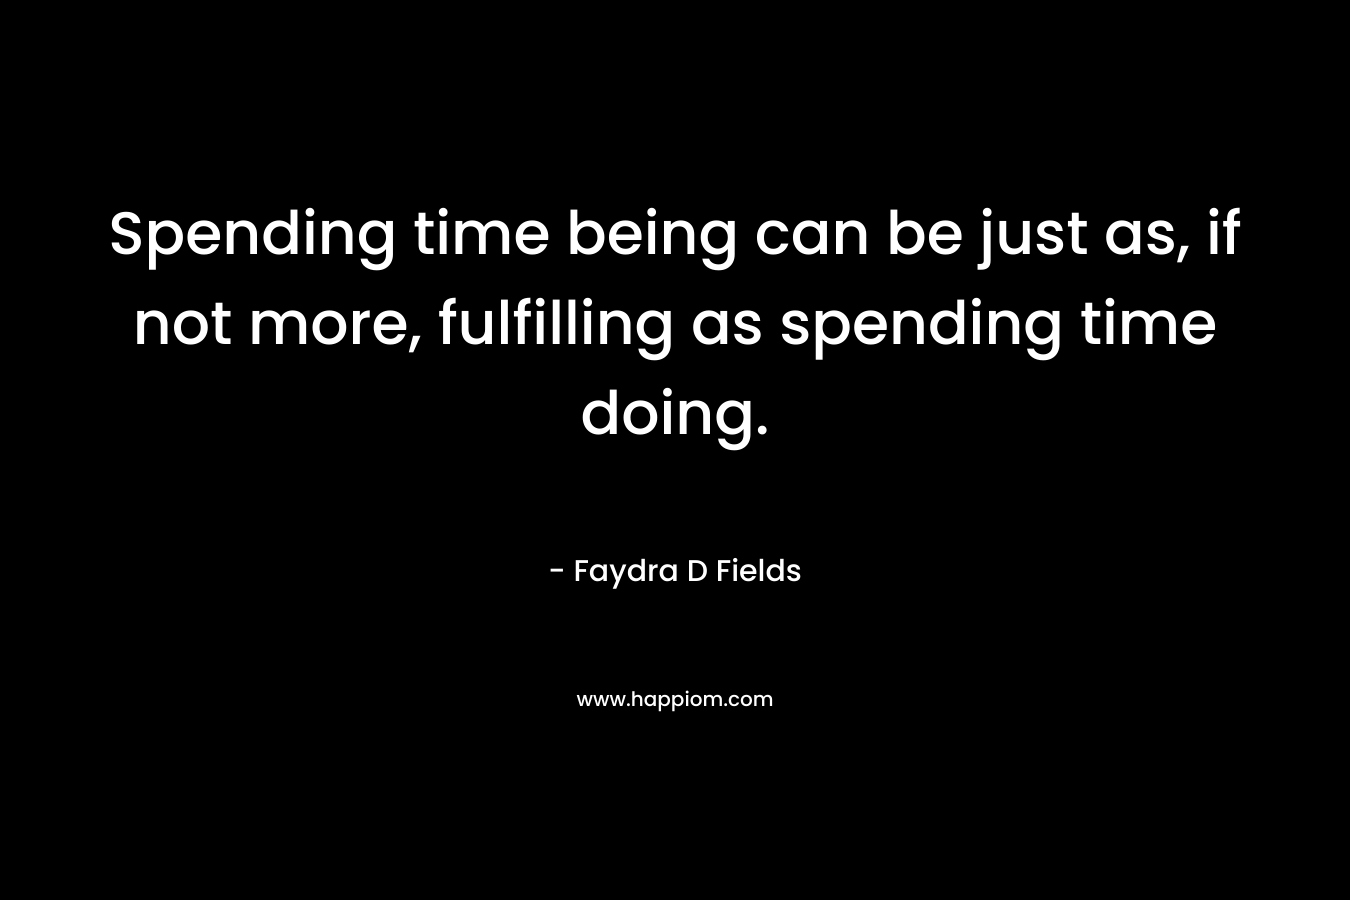 Spending time being can be just as, if not more, fulfilling as spending time doing. – Faydra D Fields